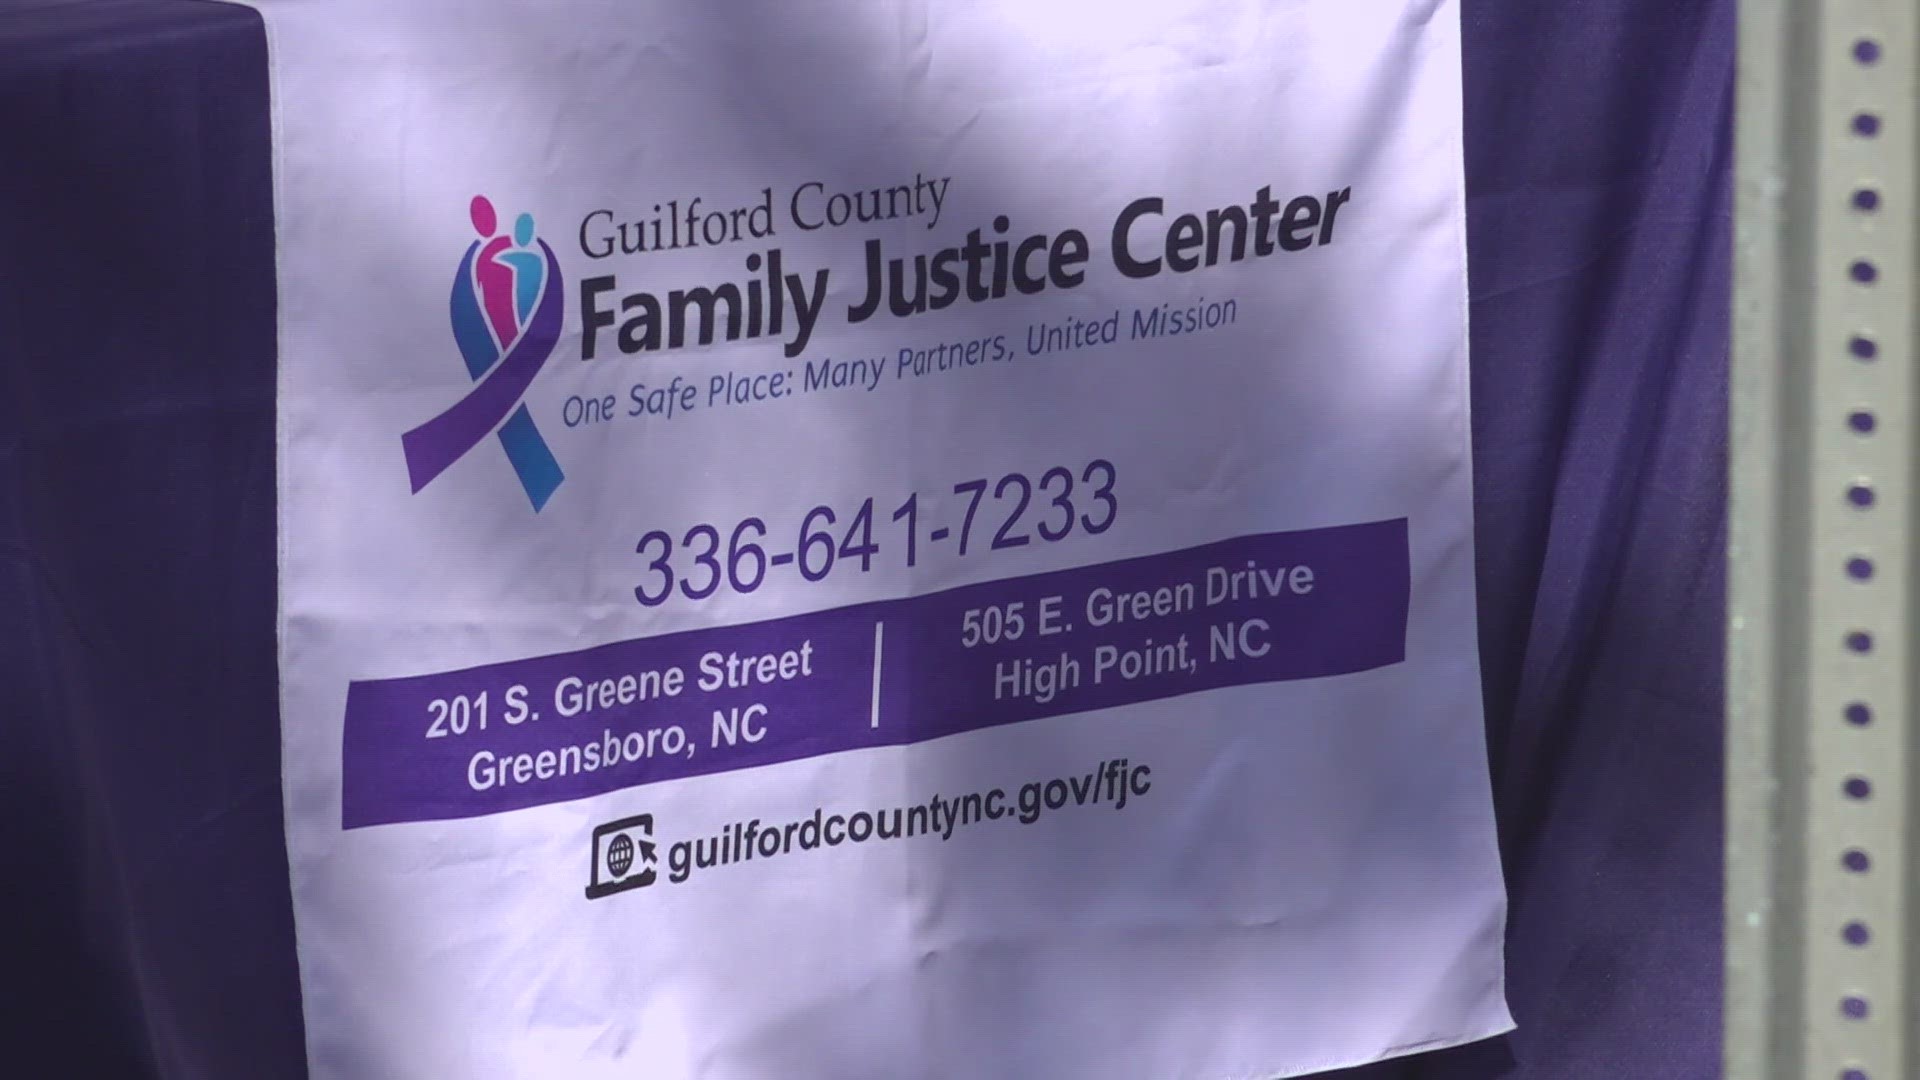 35.2% of North Carolina women and 30.3% of North Carolina men experience intimate partner violence, according to the National Coalition of Domestic Violence.